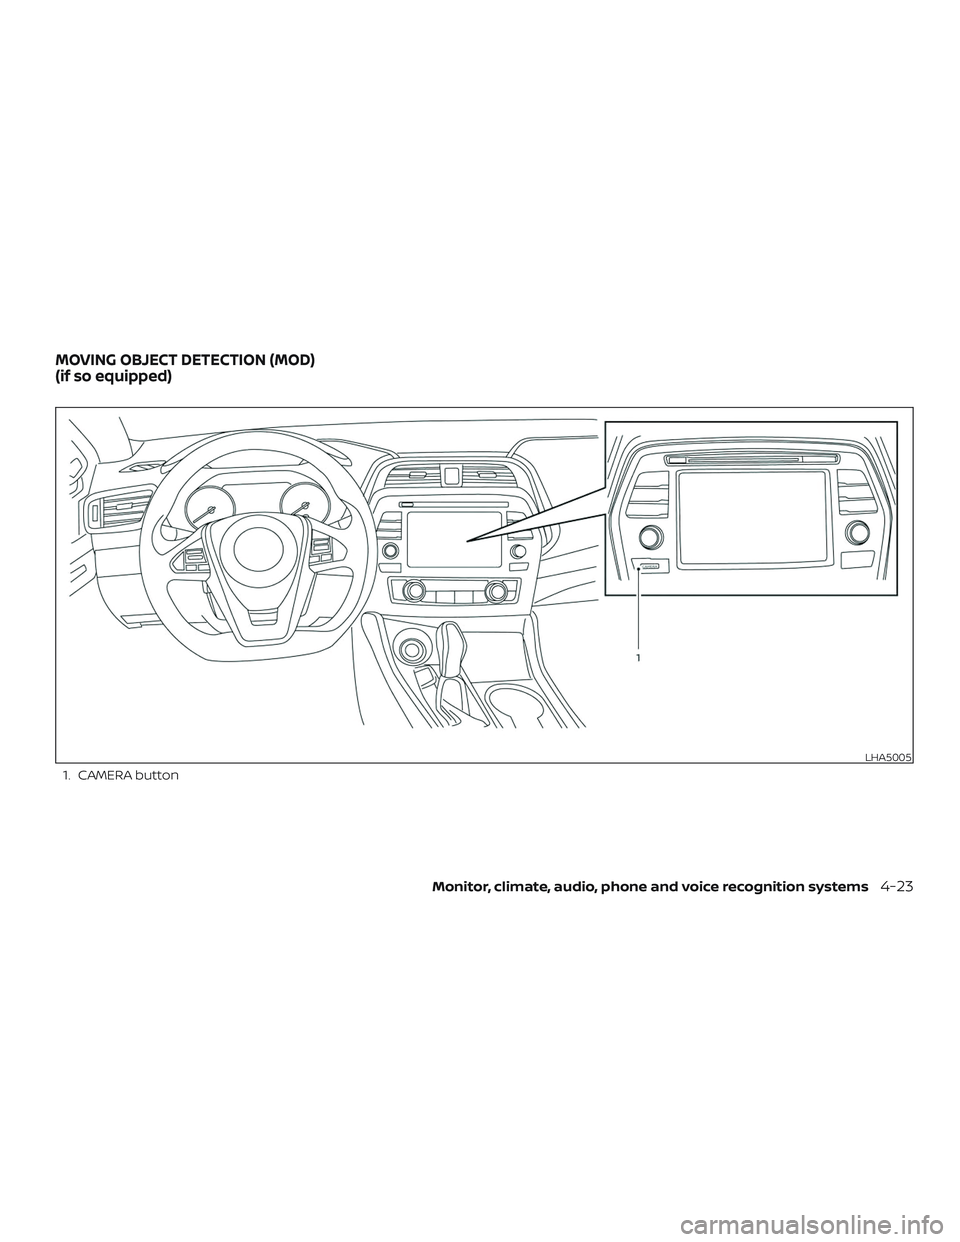 NISSAN MAXIMA 2020  Owner´s Manual 1. CAMERA button
LHA5005
MOVING OBJECT DETECTION (MOD)
(if so equipped)
Monitor, climate, audio, phone and voice recognition systems4-23 